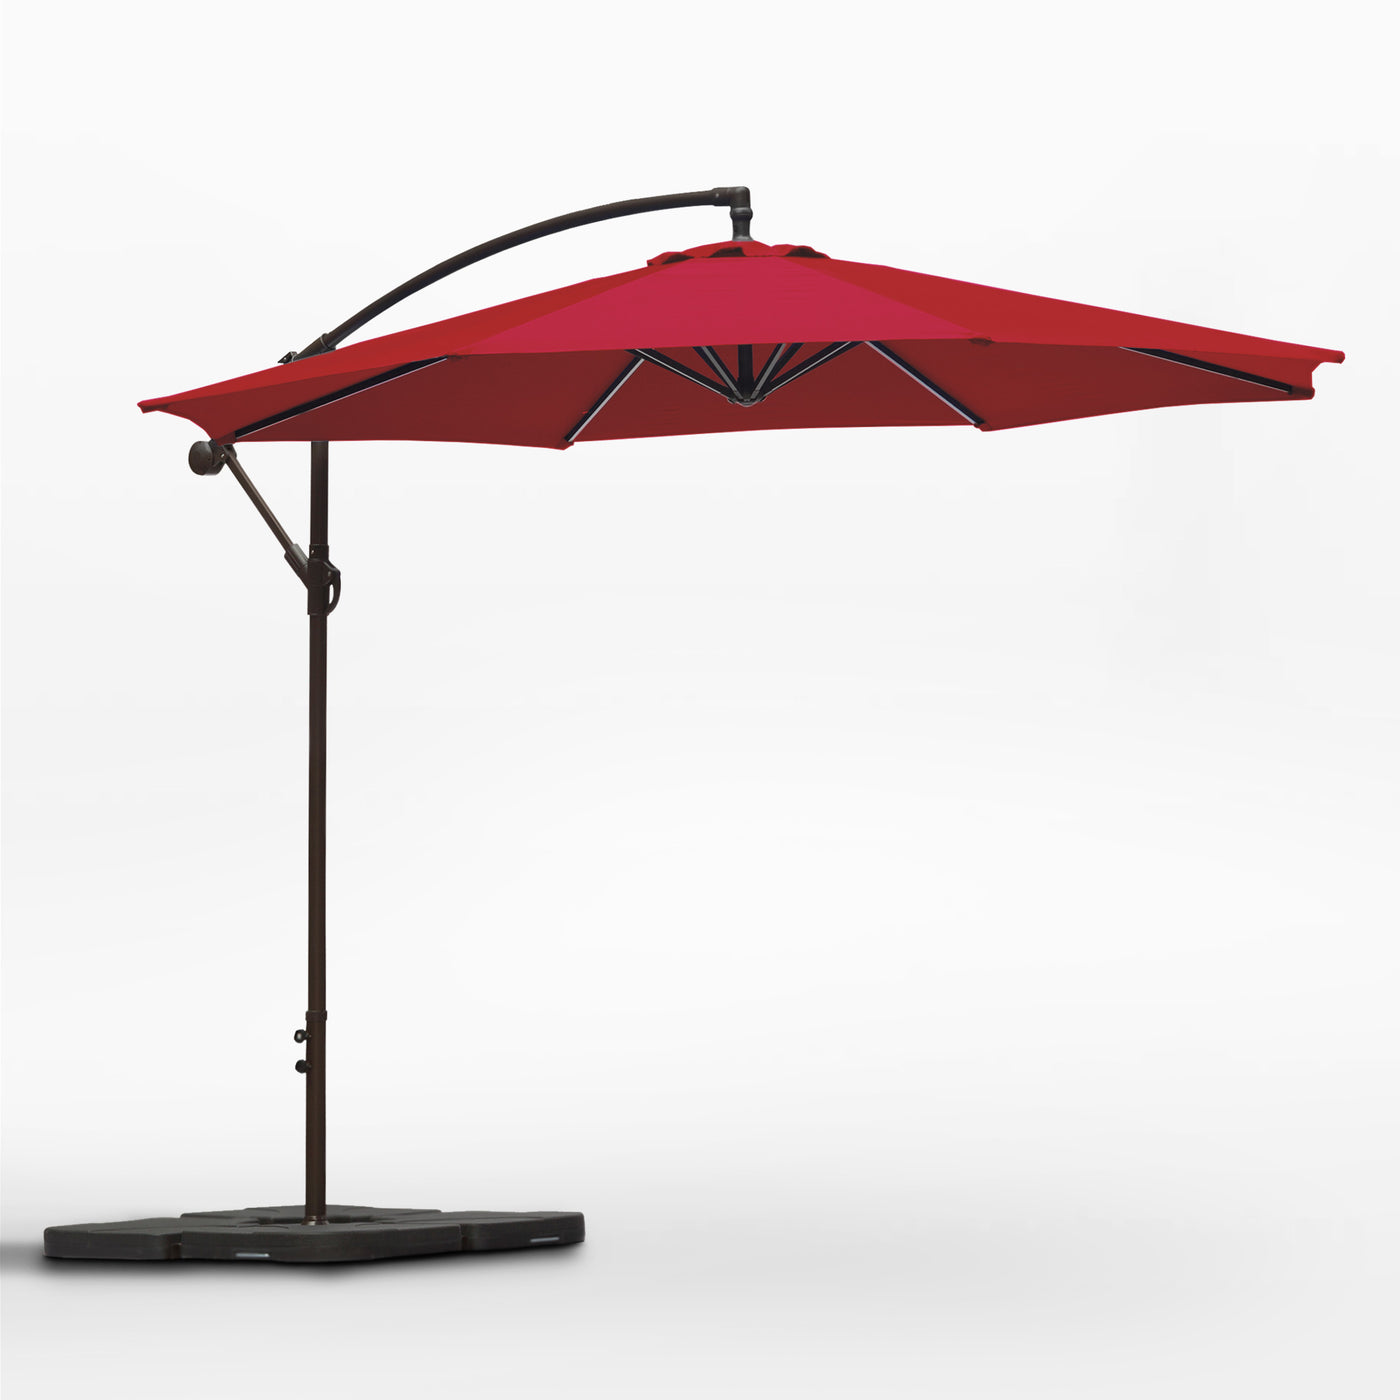 Moriti 10 Ft Outdoor Patio Cantilever Offset Umbrella with Base Weights